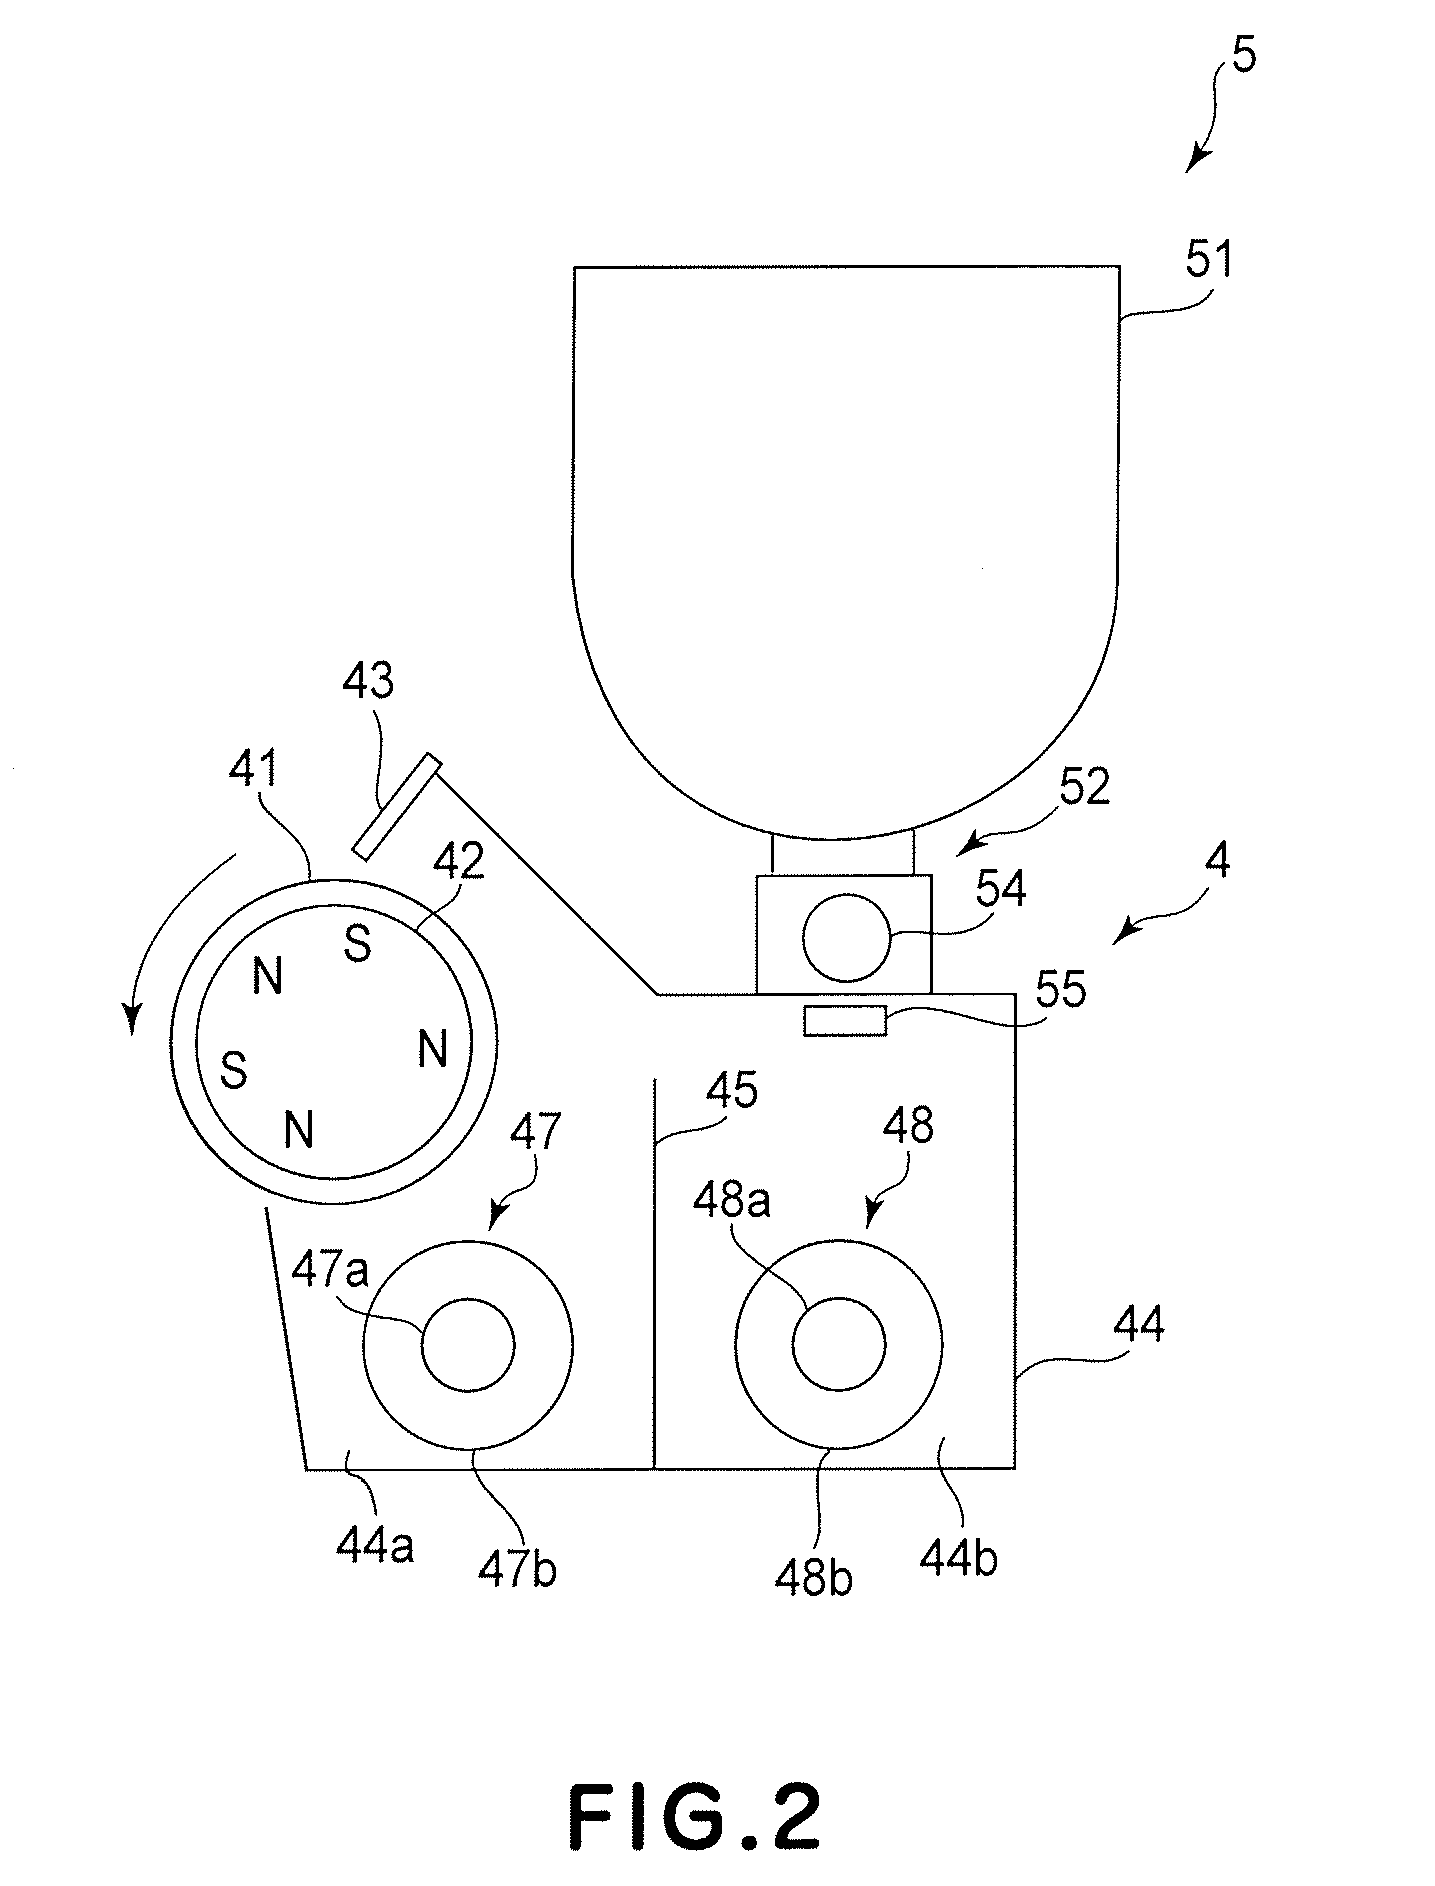 Image forming apparatus featuring a controller for controlling rotation of a developer feeding screw in response to an angle of inclination of the apparatus